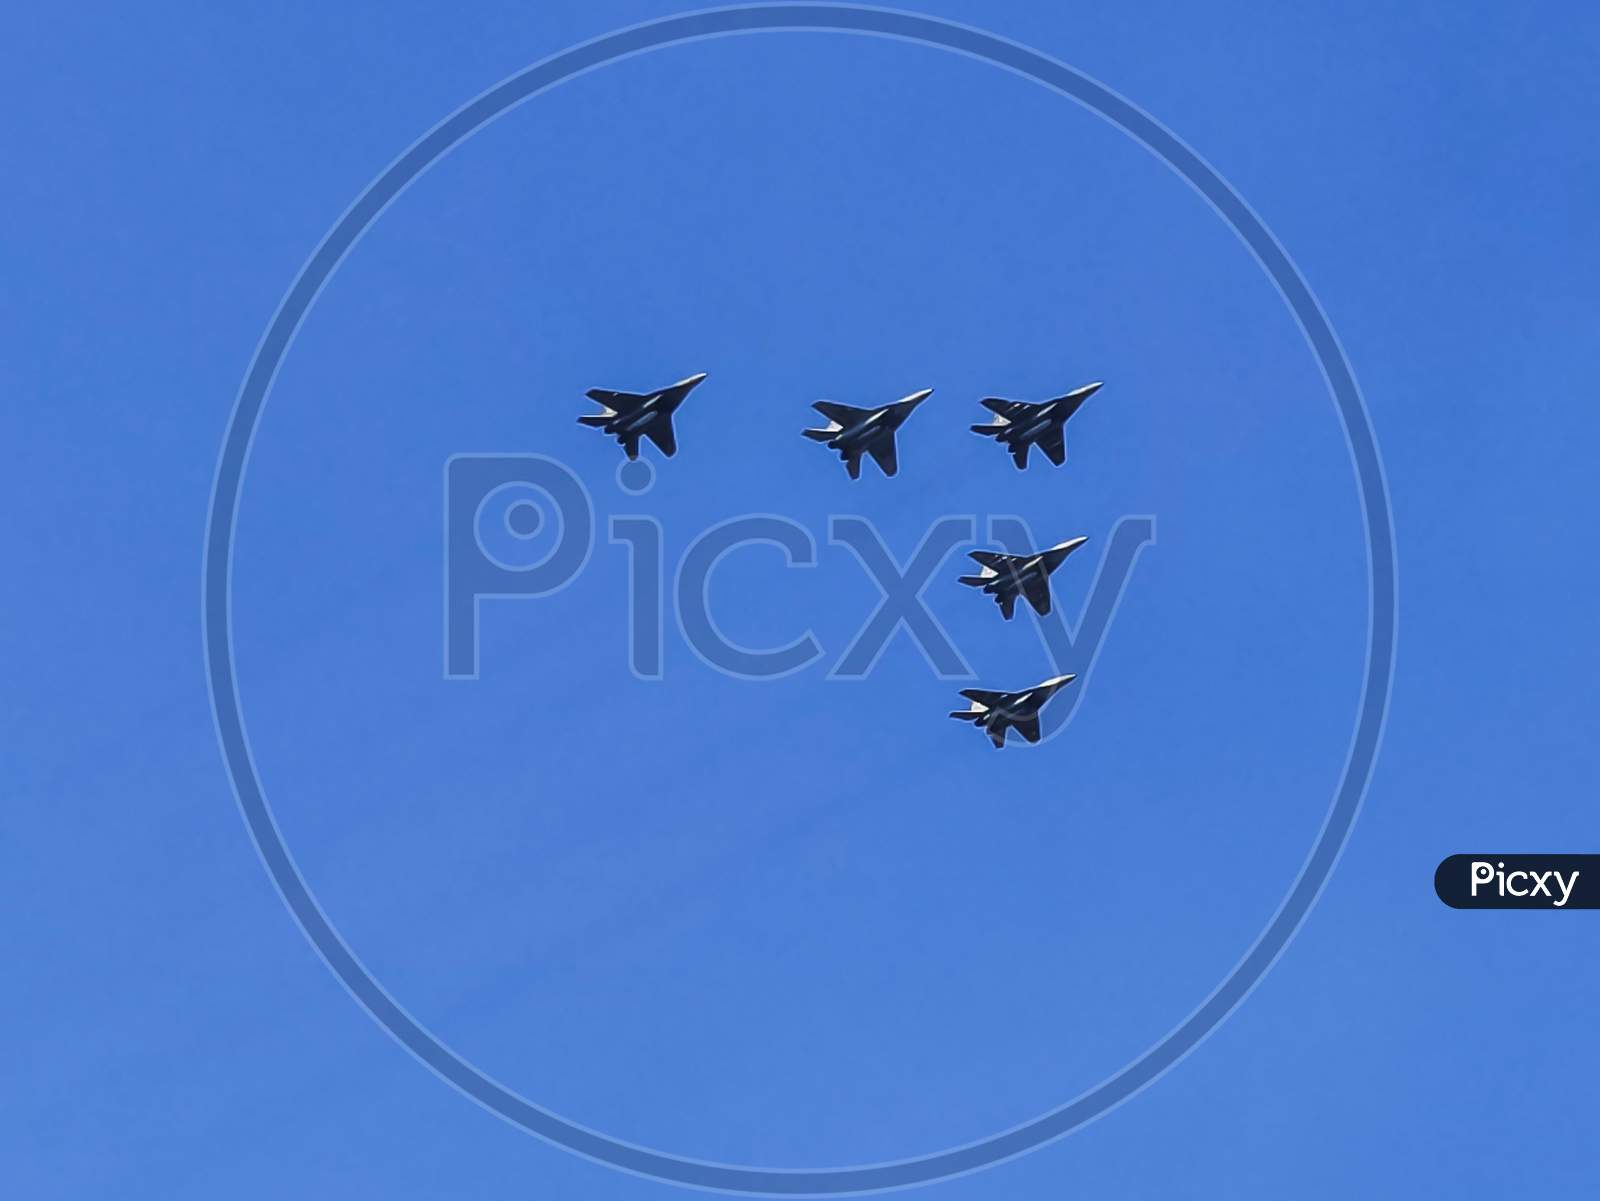 Indian Air Force Fighter jets arrow formation